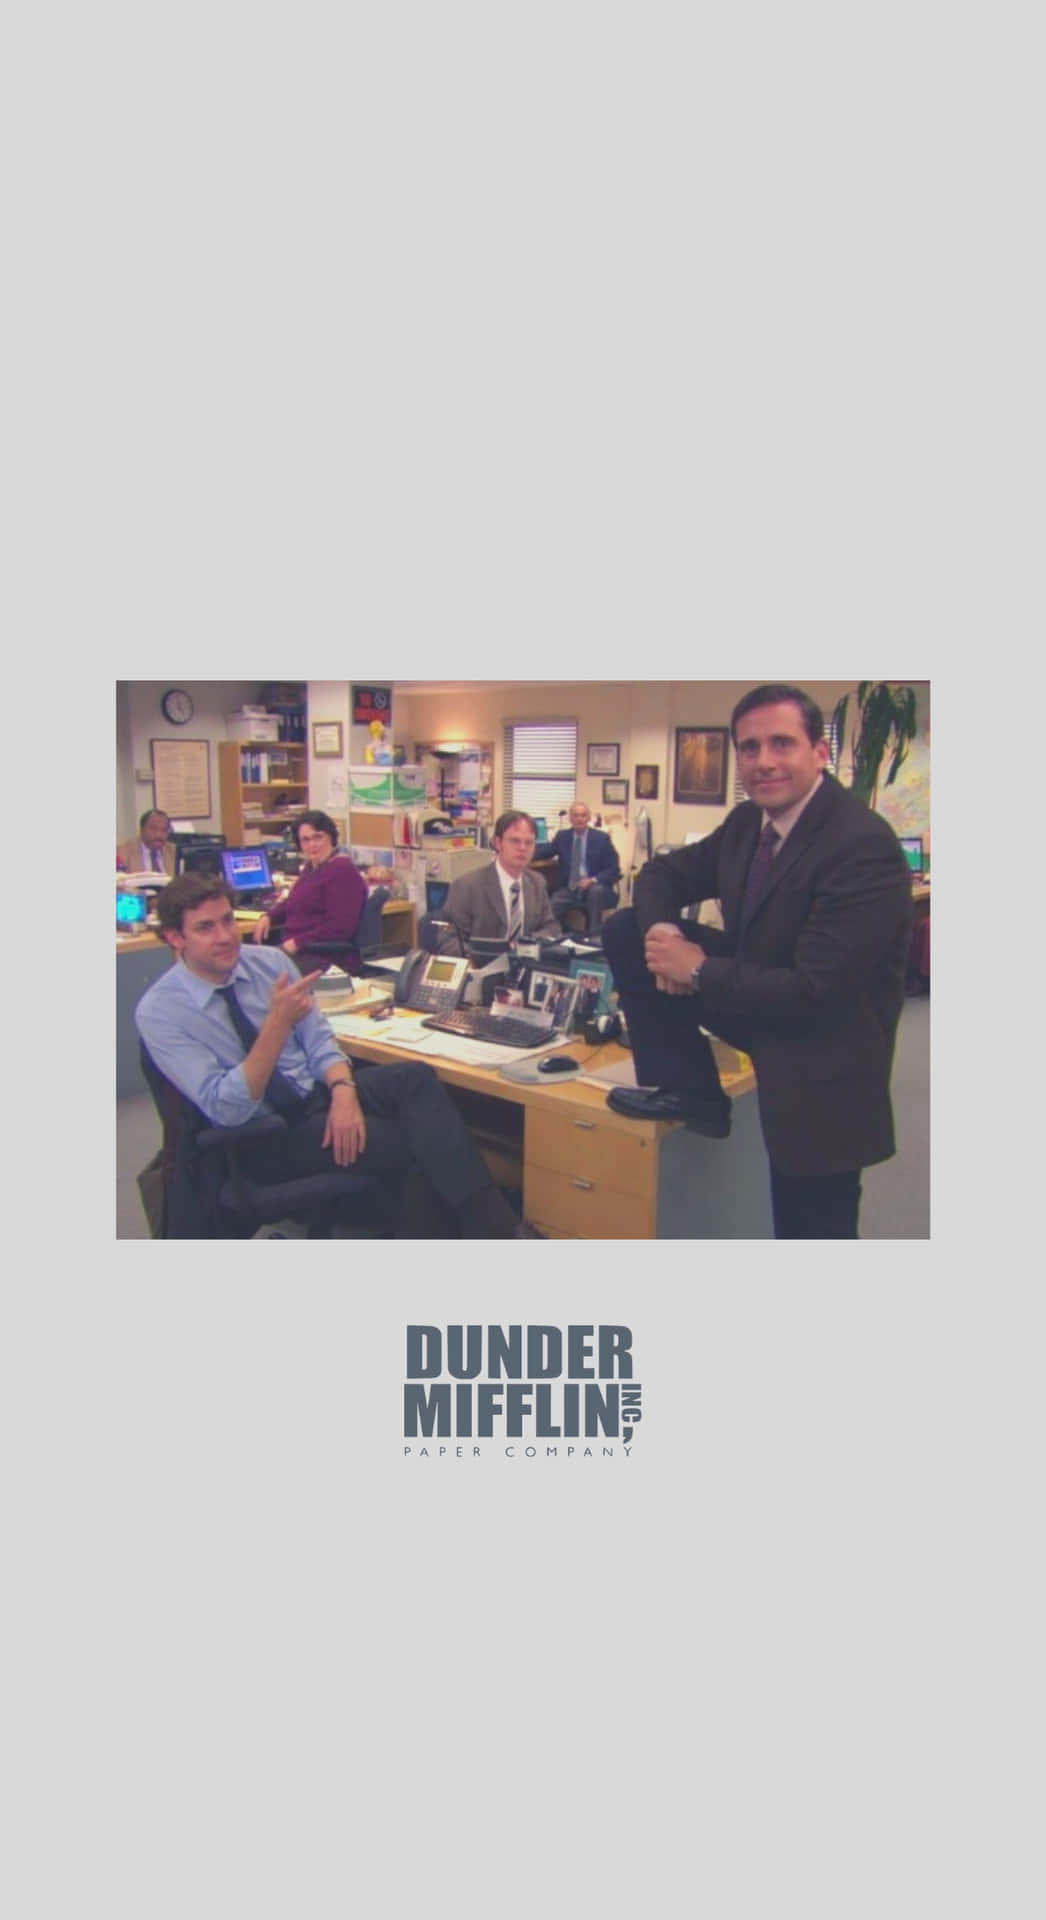 [200+] The Office Backgrounds | Wallpapers.com